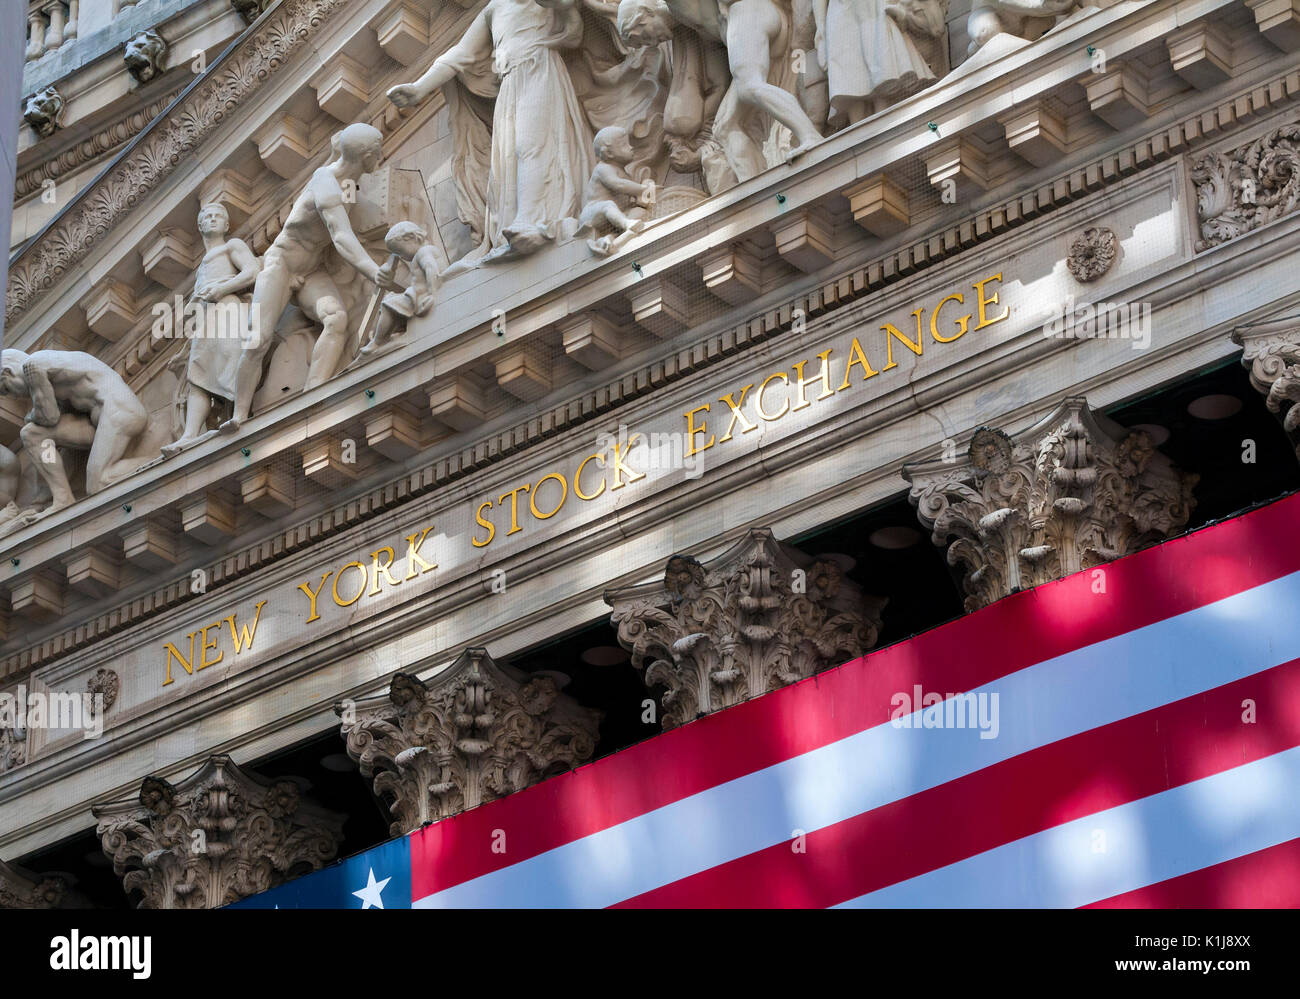 The front of the New York Stock Exchange Building, Wall Street, New York Stock Photo